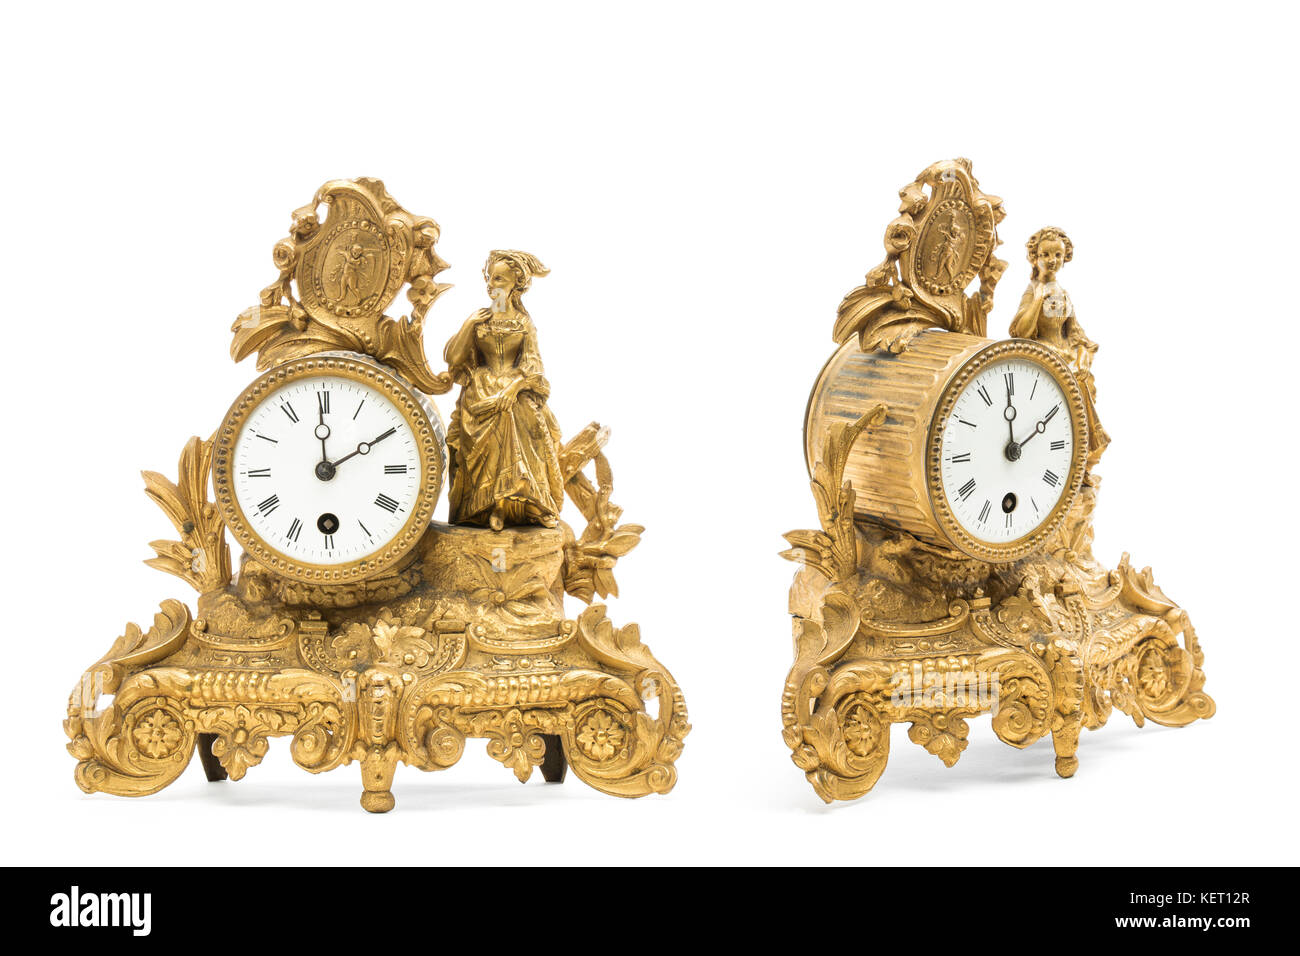 Antique gold colored table clocks on the white background. Stock Photo